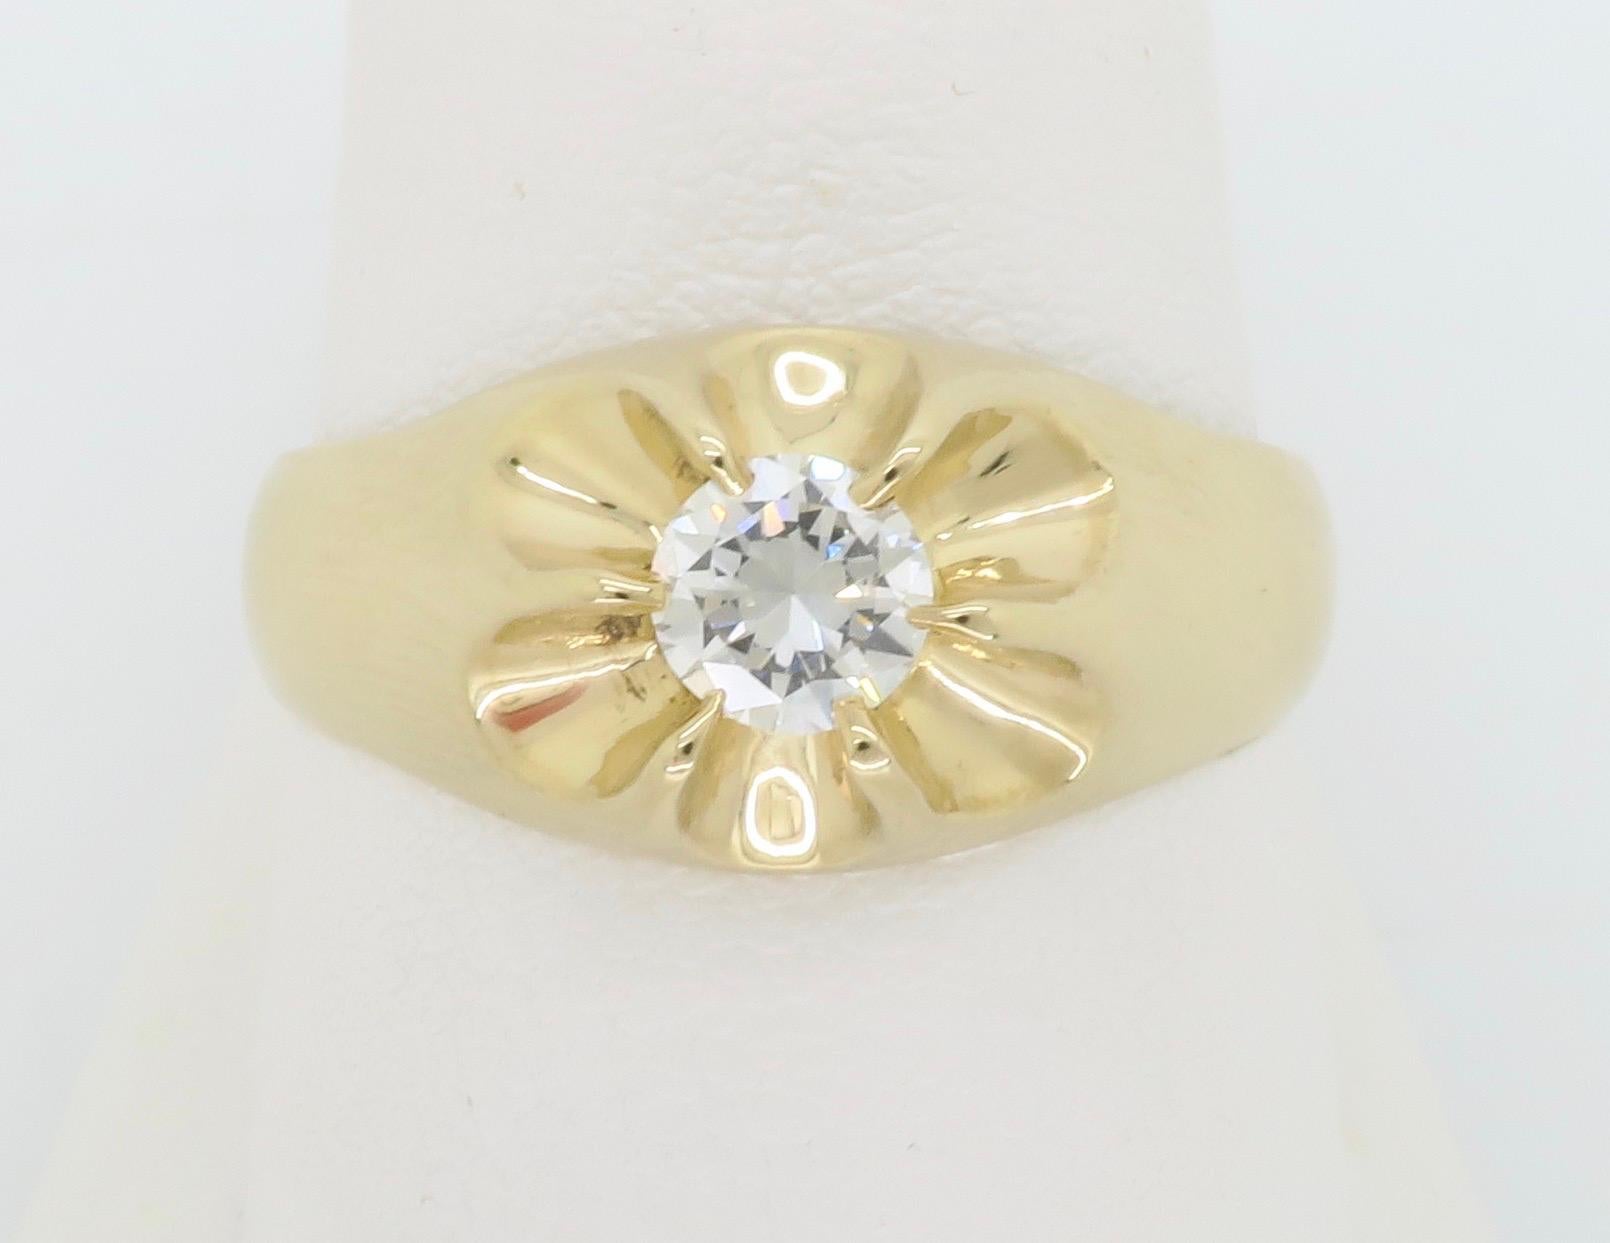 This classic style men's ring features a .45ct Round Diamond in the center. 

Gemstone: Diamond
Diamond Carat Weight: Approximately .45ct
Diamond Cut: Round Brilliant Cut
Color: F
Clarity: VS2
Metal: 14K Yellow Gold
Marked/Tested: Stamped